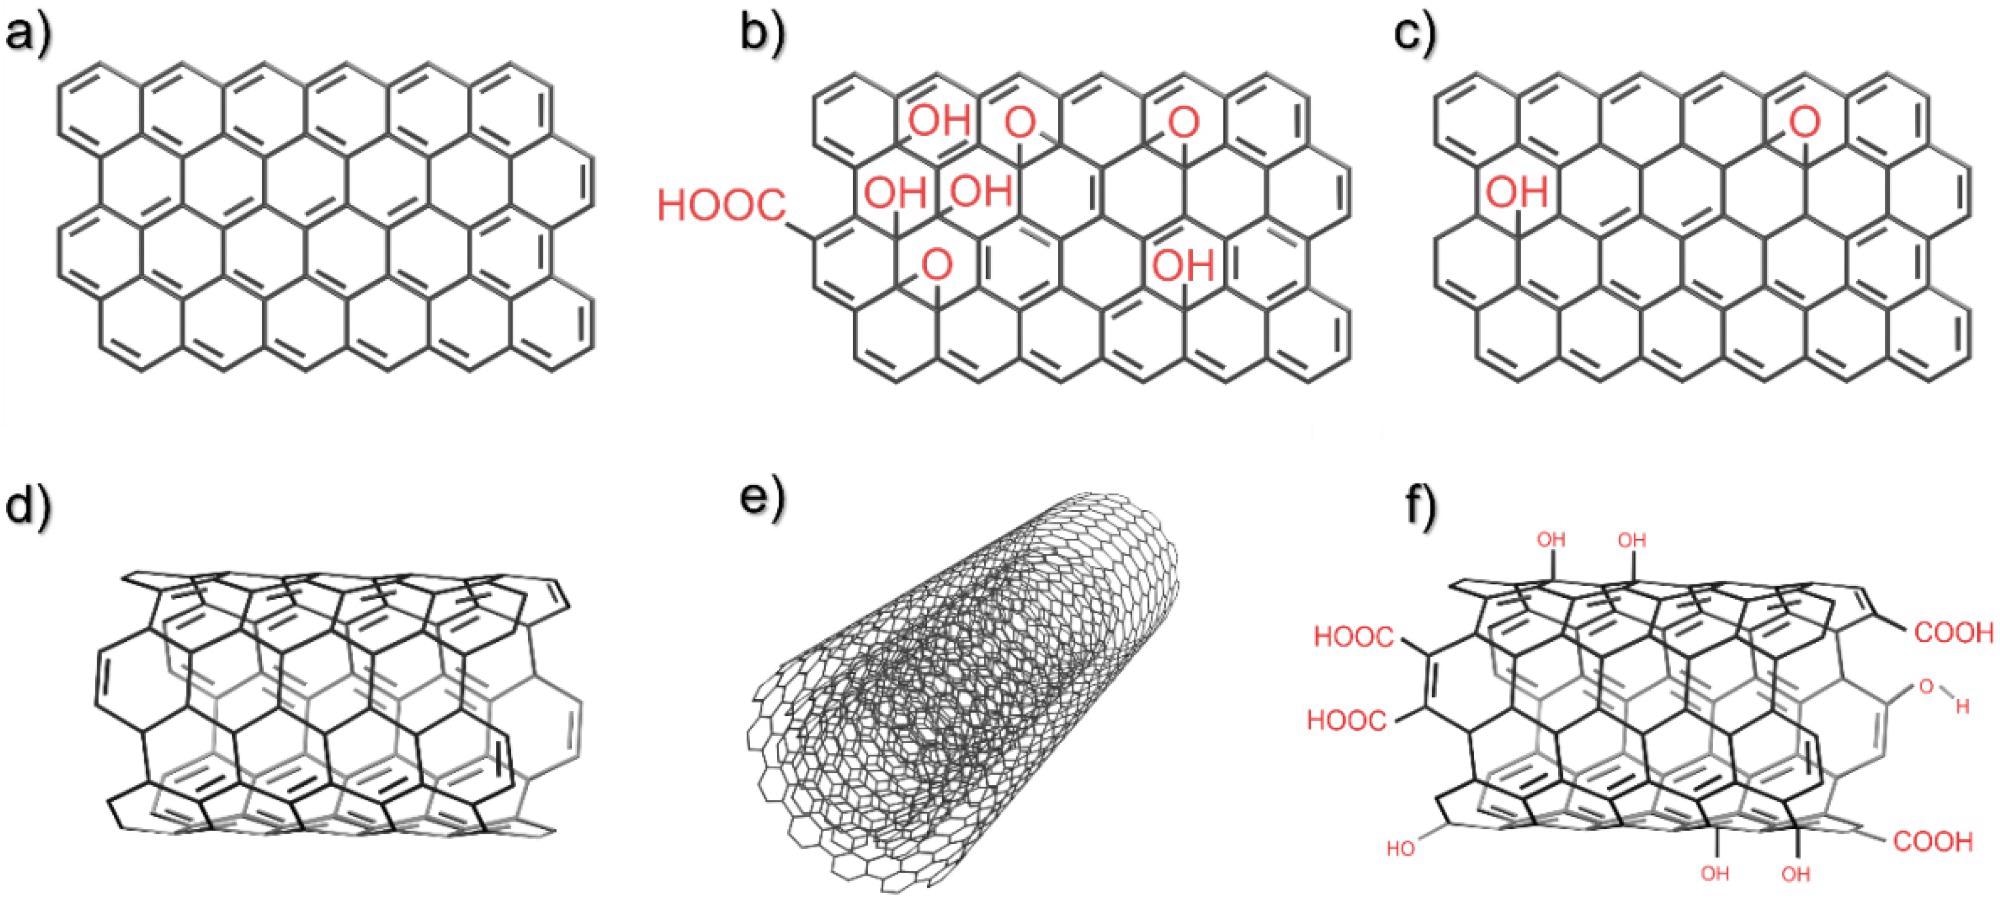 Structure of (a) graphene, (b) graphene oxide, (c) reduced graphene oxide, (d) single-walled carbon nanotube (e) multiwalled carbon nanotube, and (f) functionalised carbon nanotube. Annotation indicates where the structure is not pure carbon.